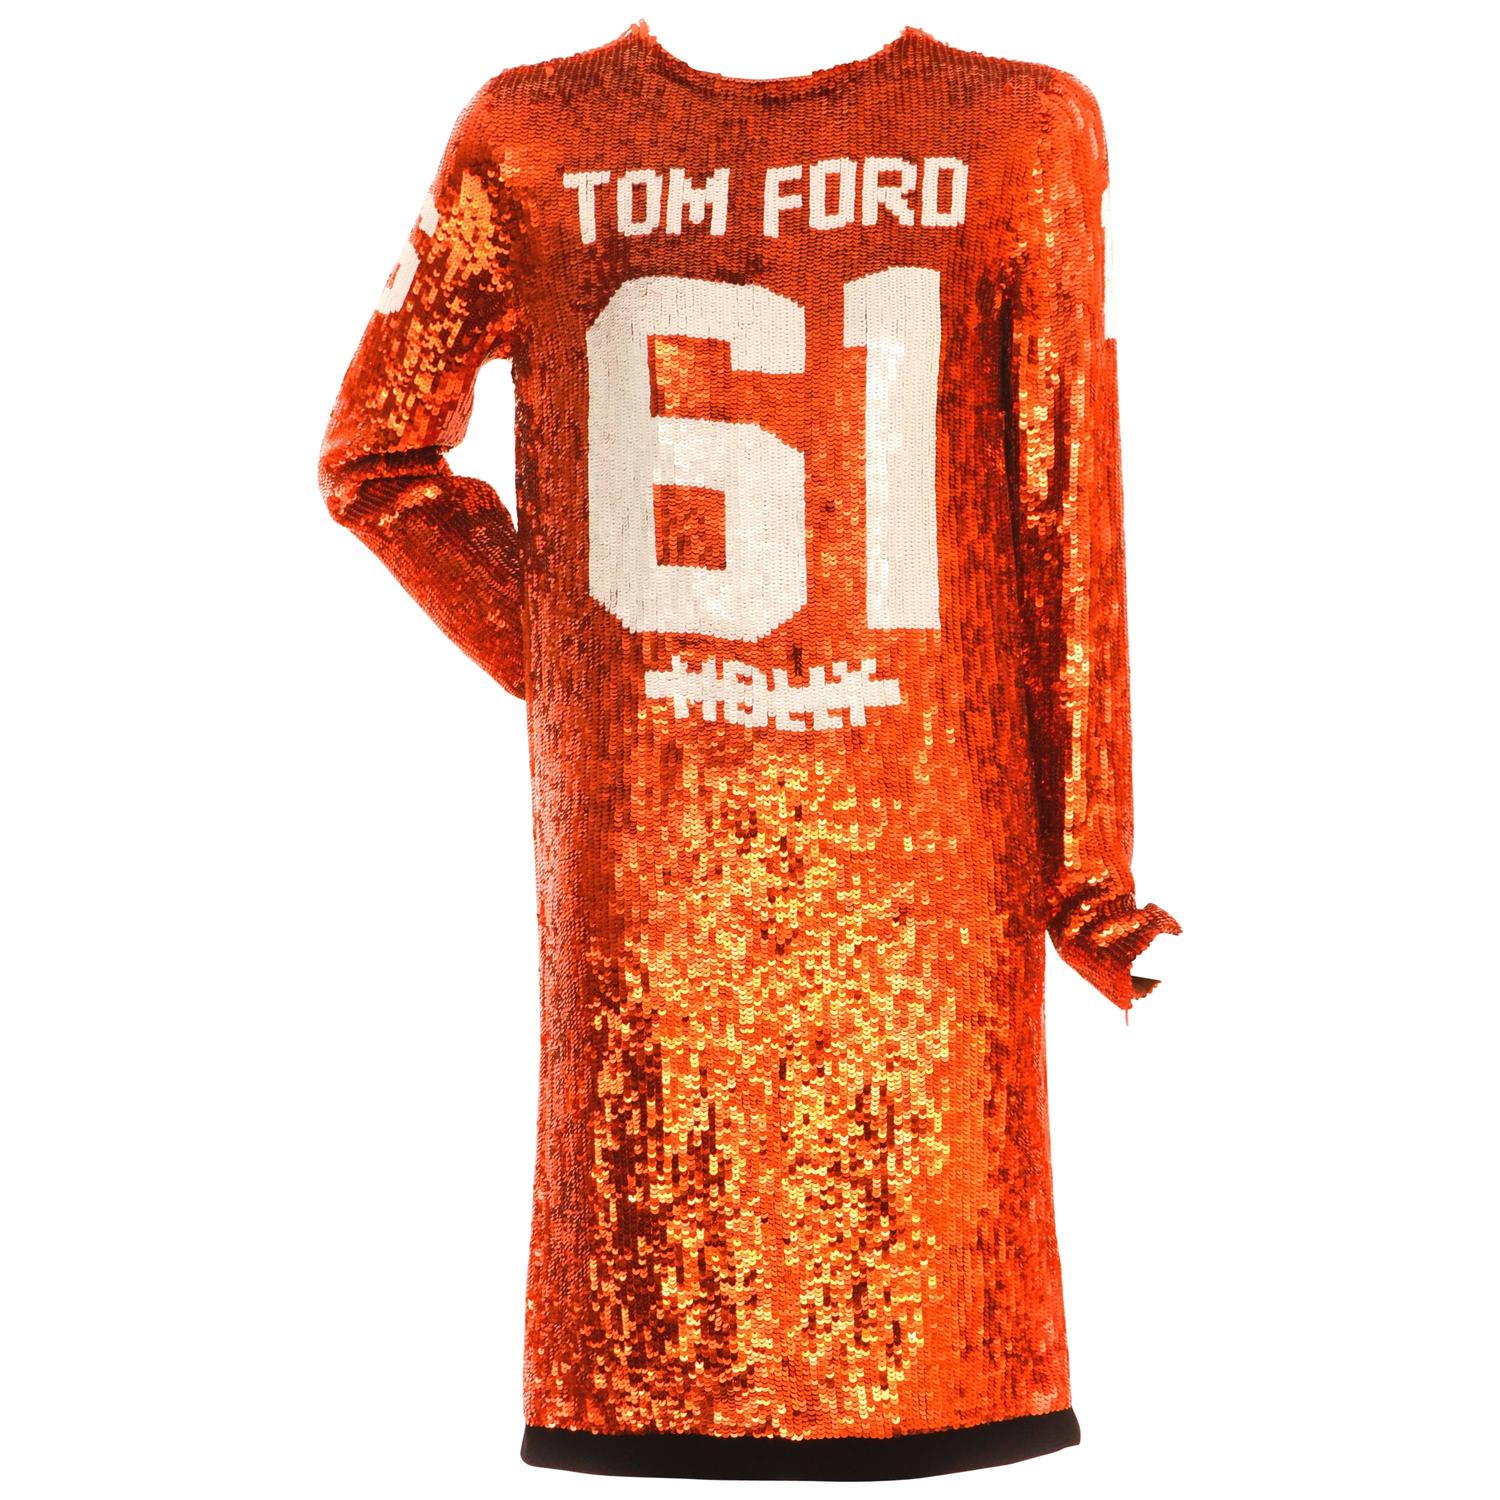 tom ford sequin dress molly